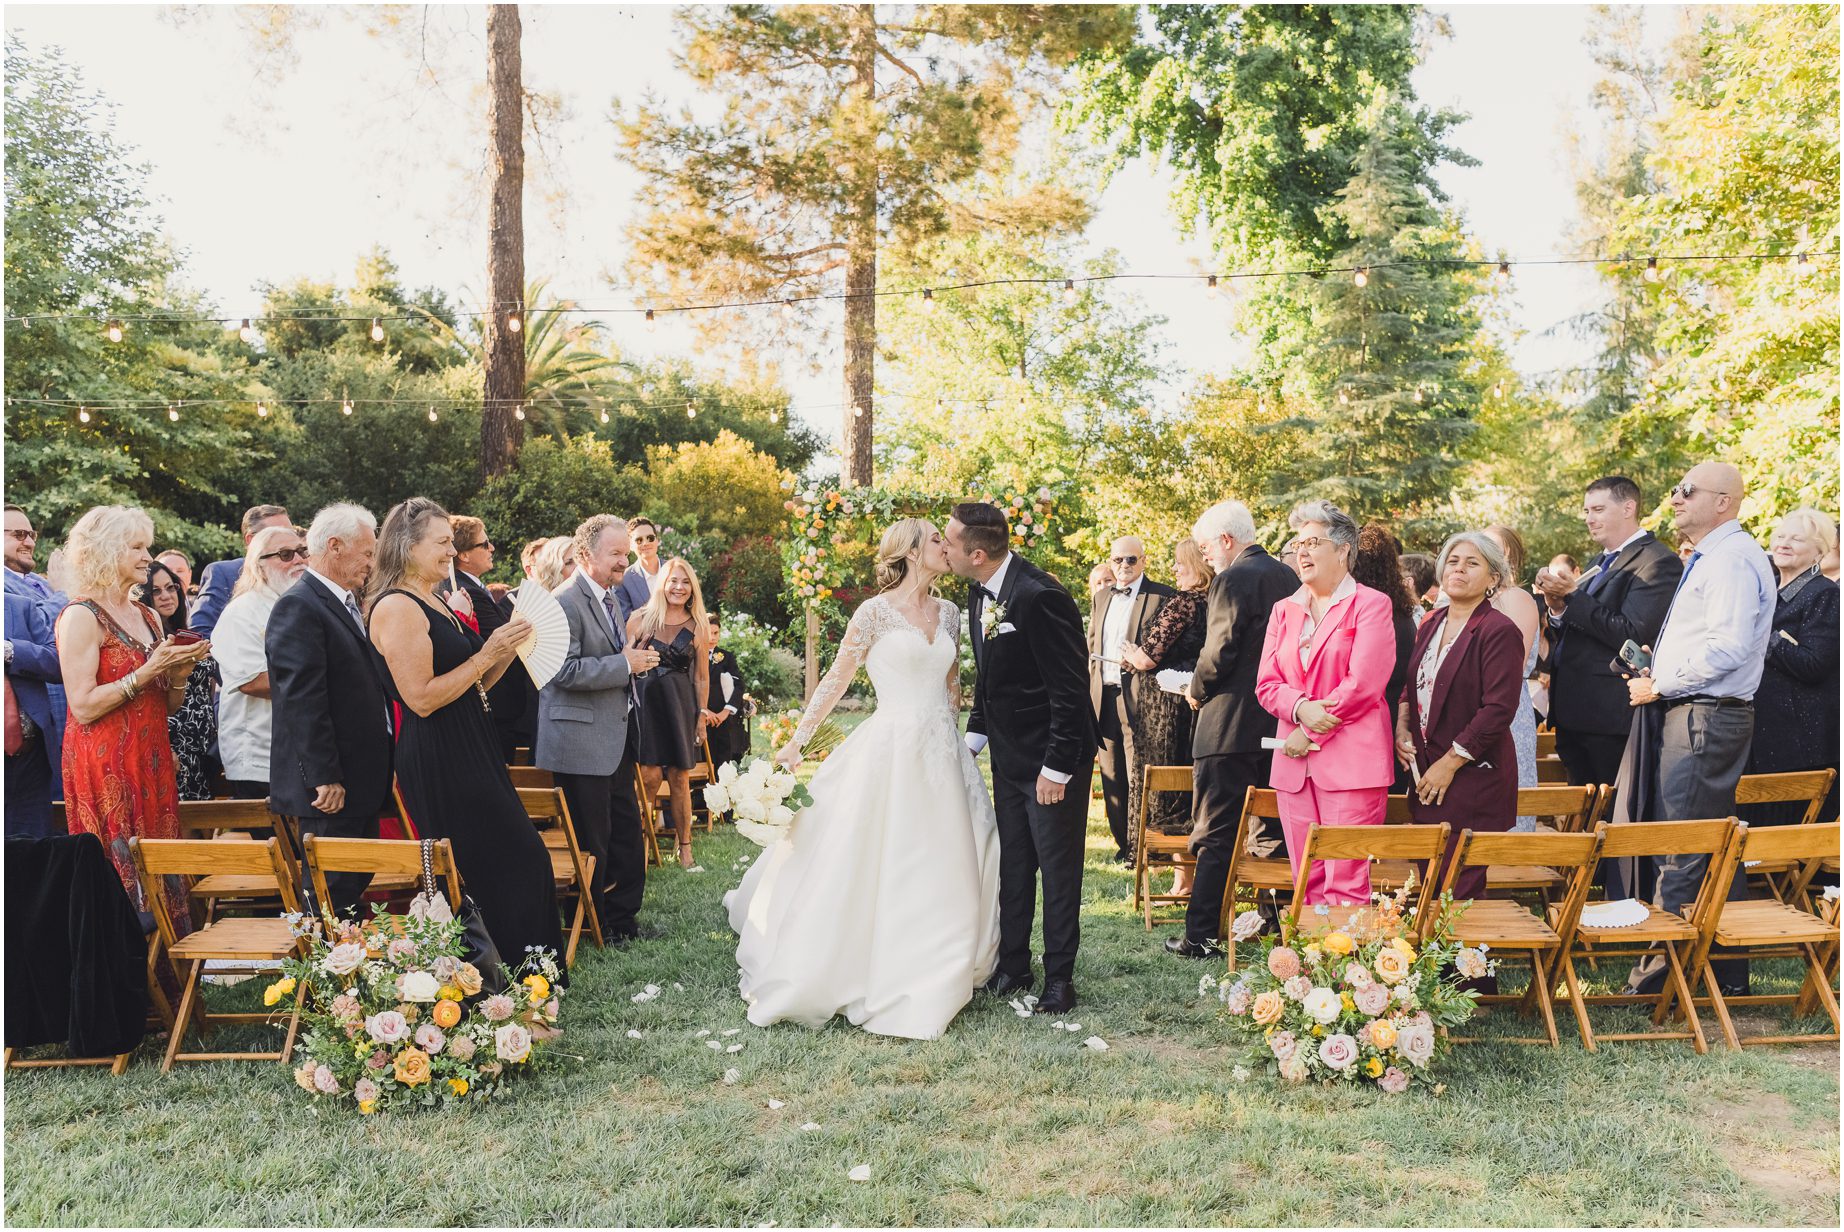 As the bride and groom kiss, walking out of their wedding, their guests look on with joy. Colorful flowers flank the aisle, and trees surround the background of the ceremony space. The lodge at Malibou lake is a dreamy location for a wedding